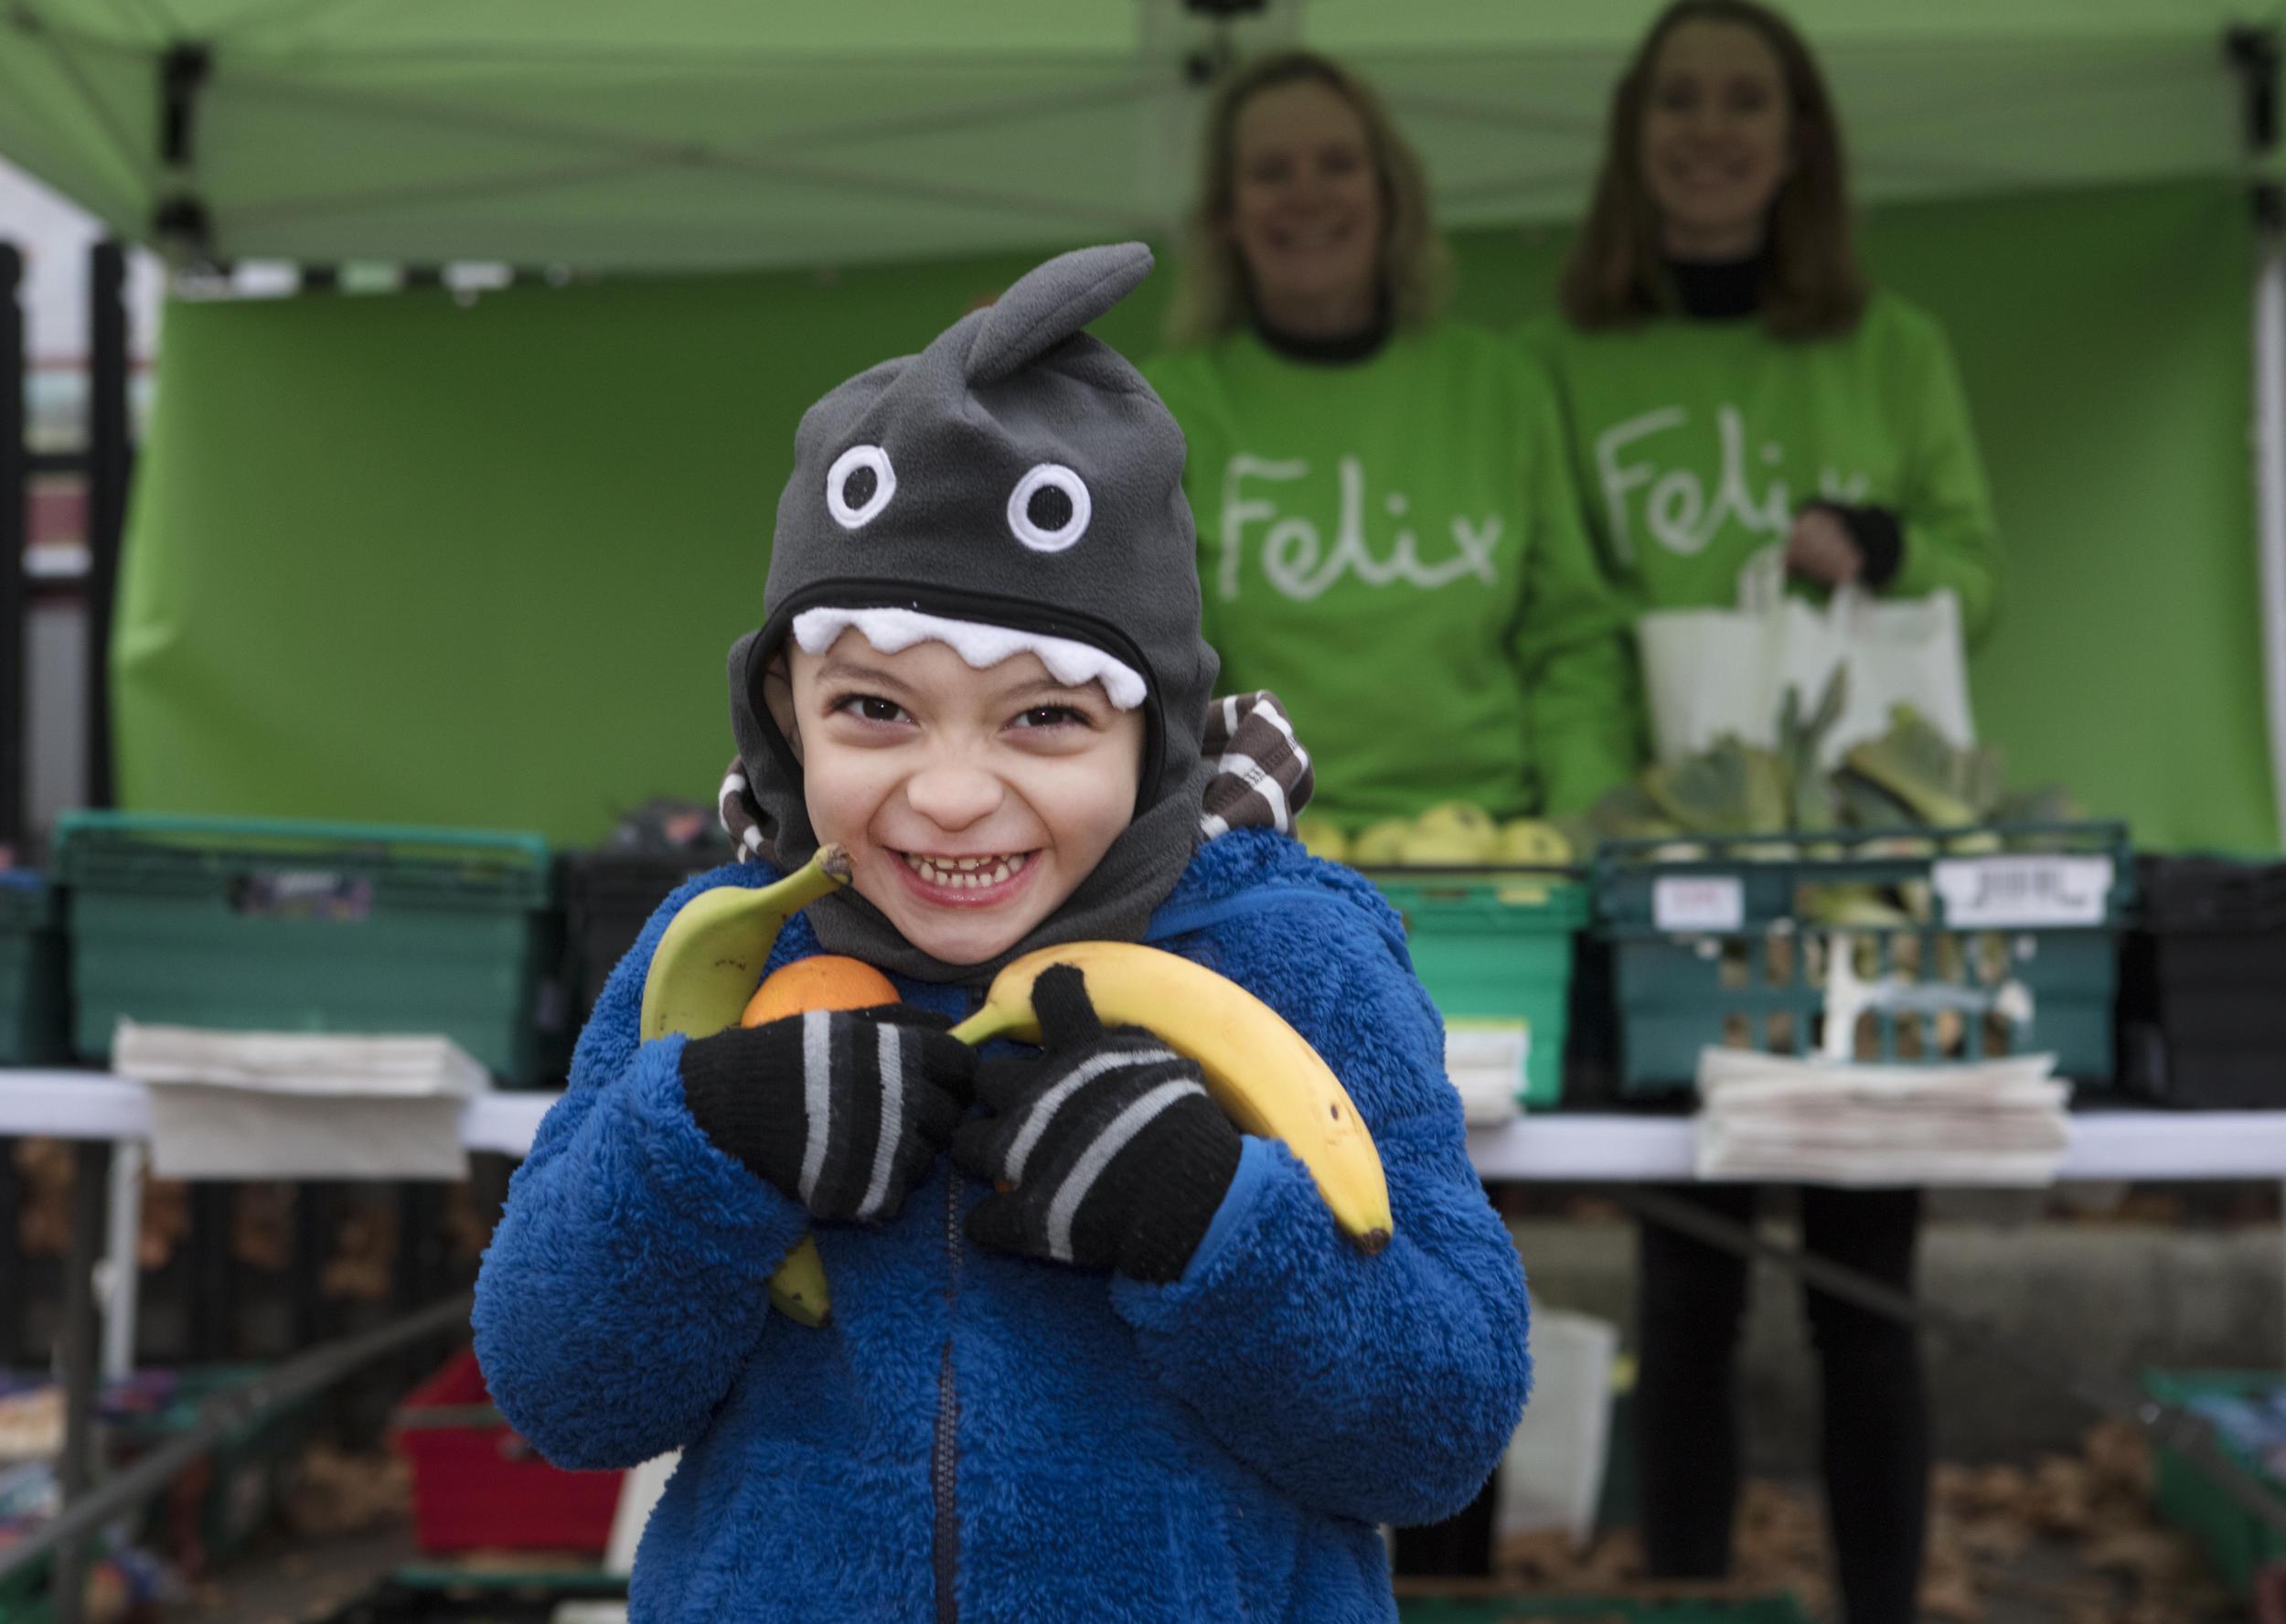 One of the first happy customers at the Felix Project's new market stall at Berrymede Junior School in west London